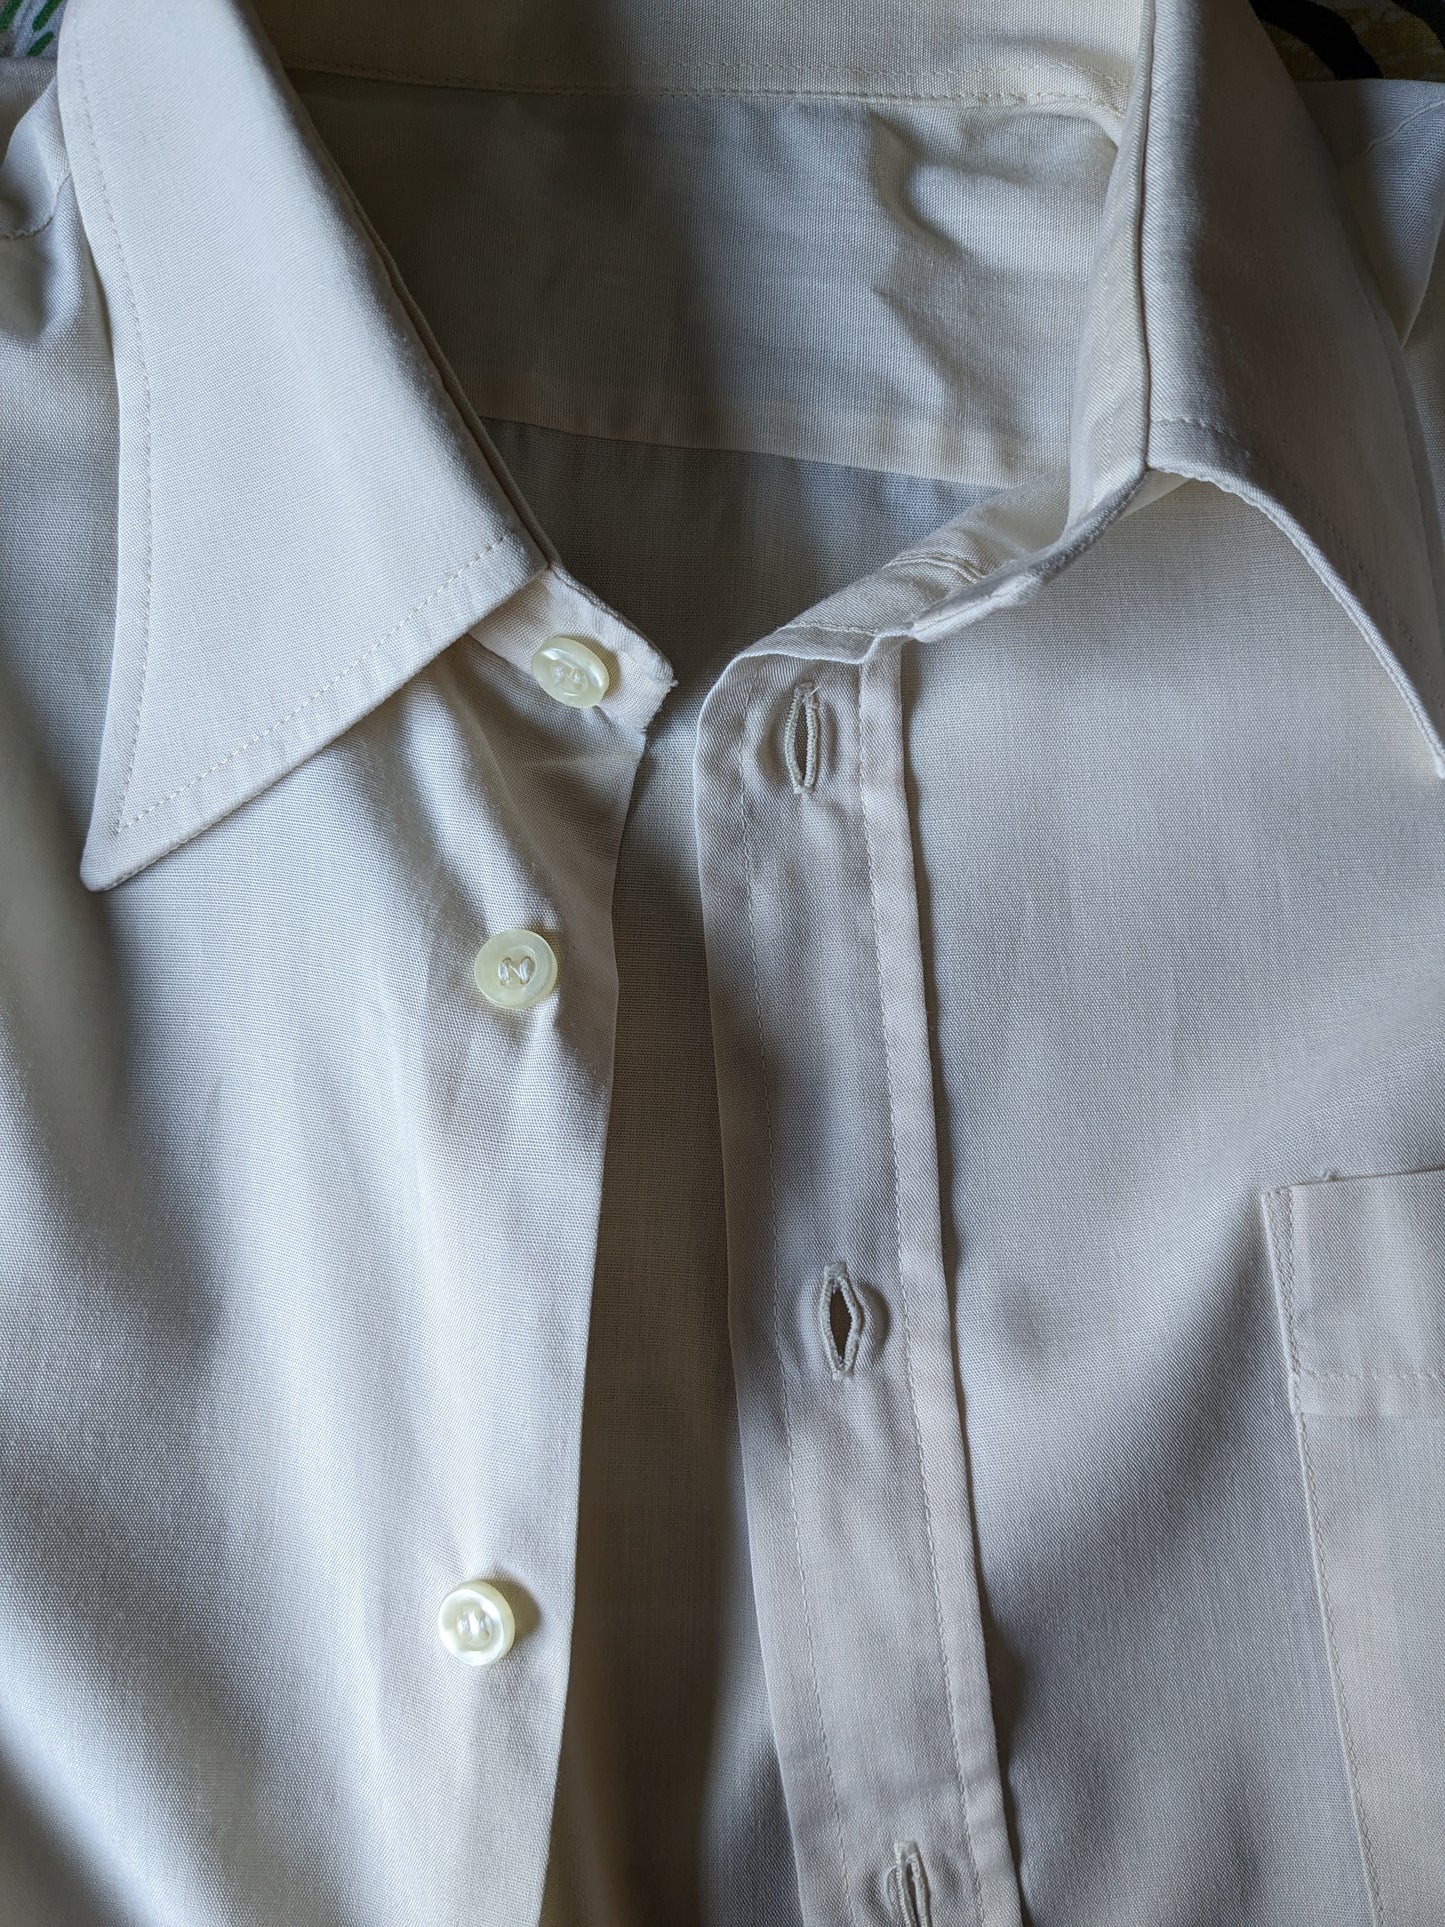 Vintage 70's shirt with point collar. Beige colored. Size XL.